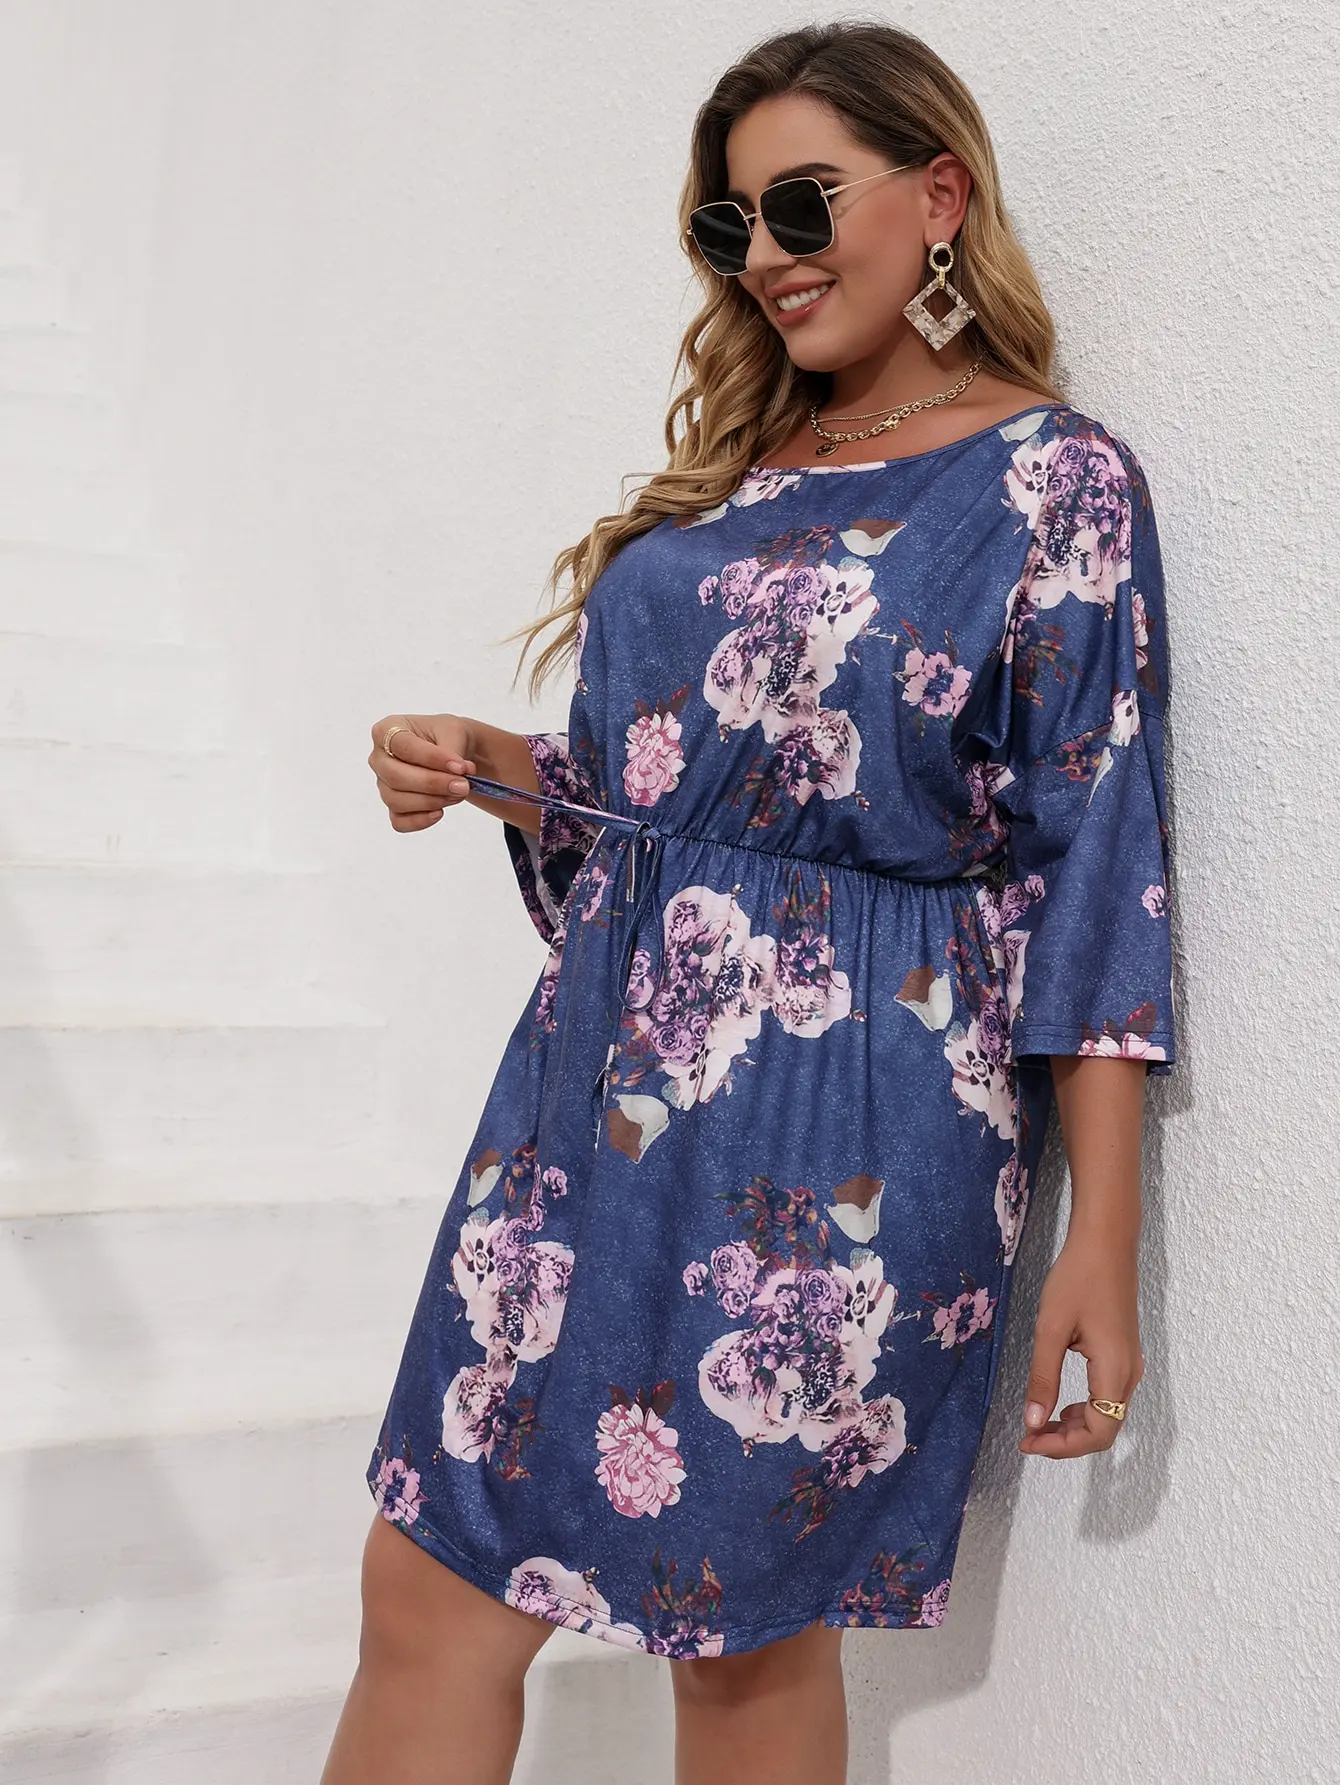 

Finjani Plus Size Women's DressesFloral Print Dolman Sleeve Belted Dress Casual Clothing For Autumn New